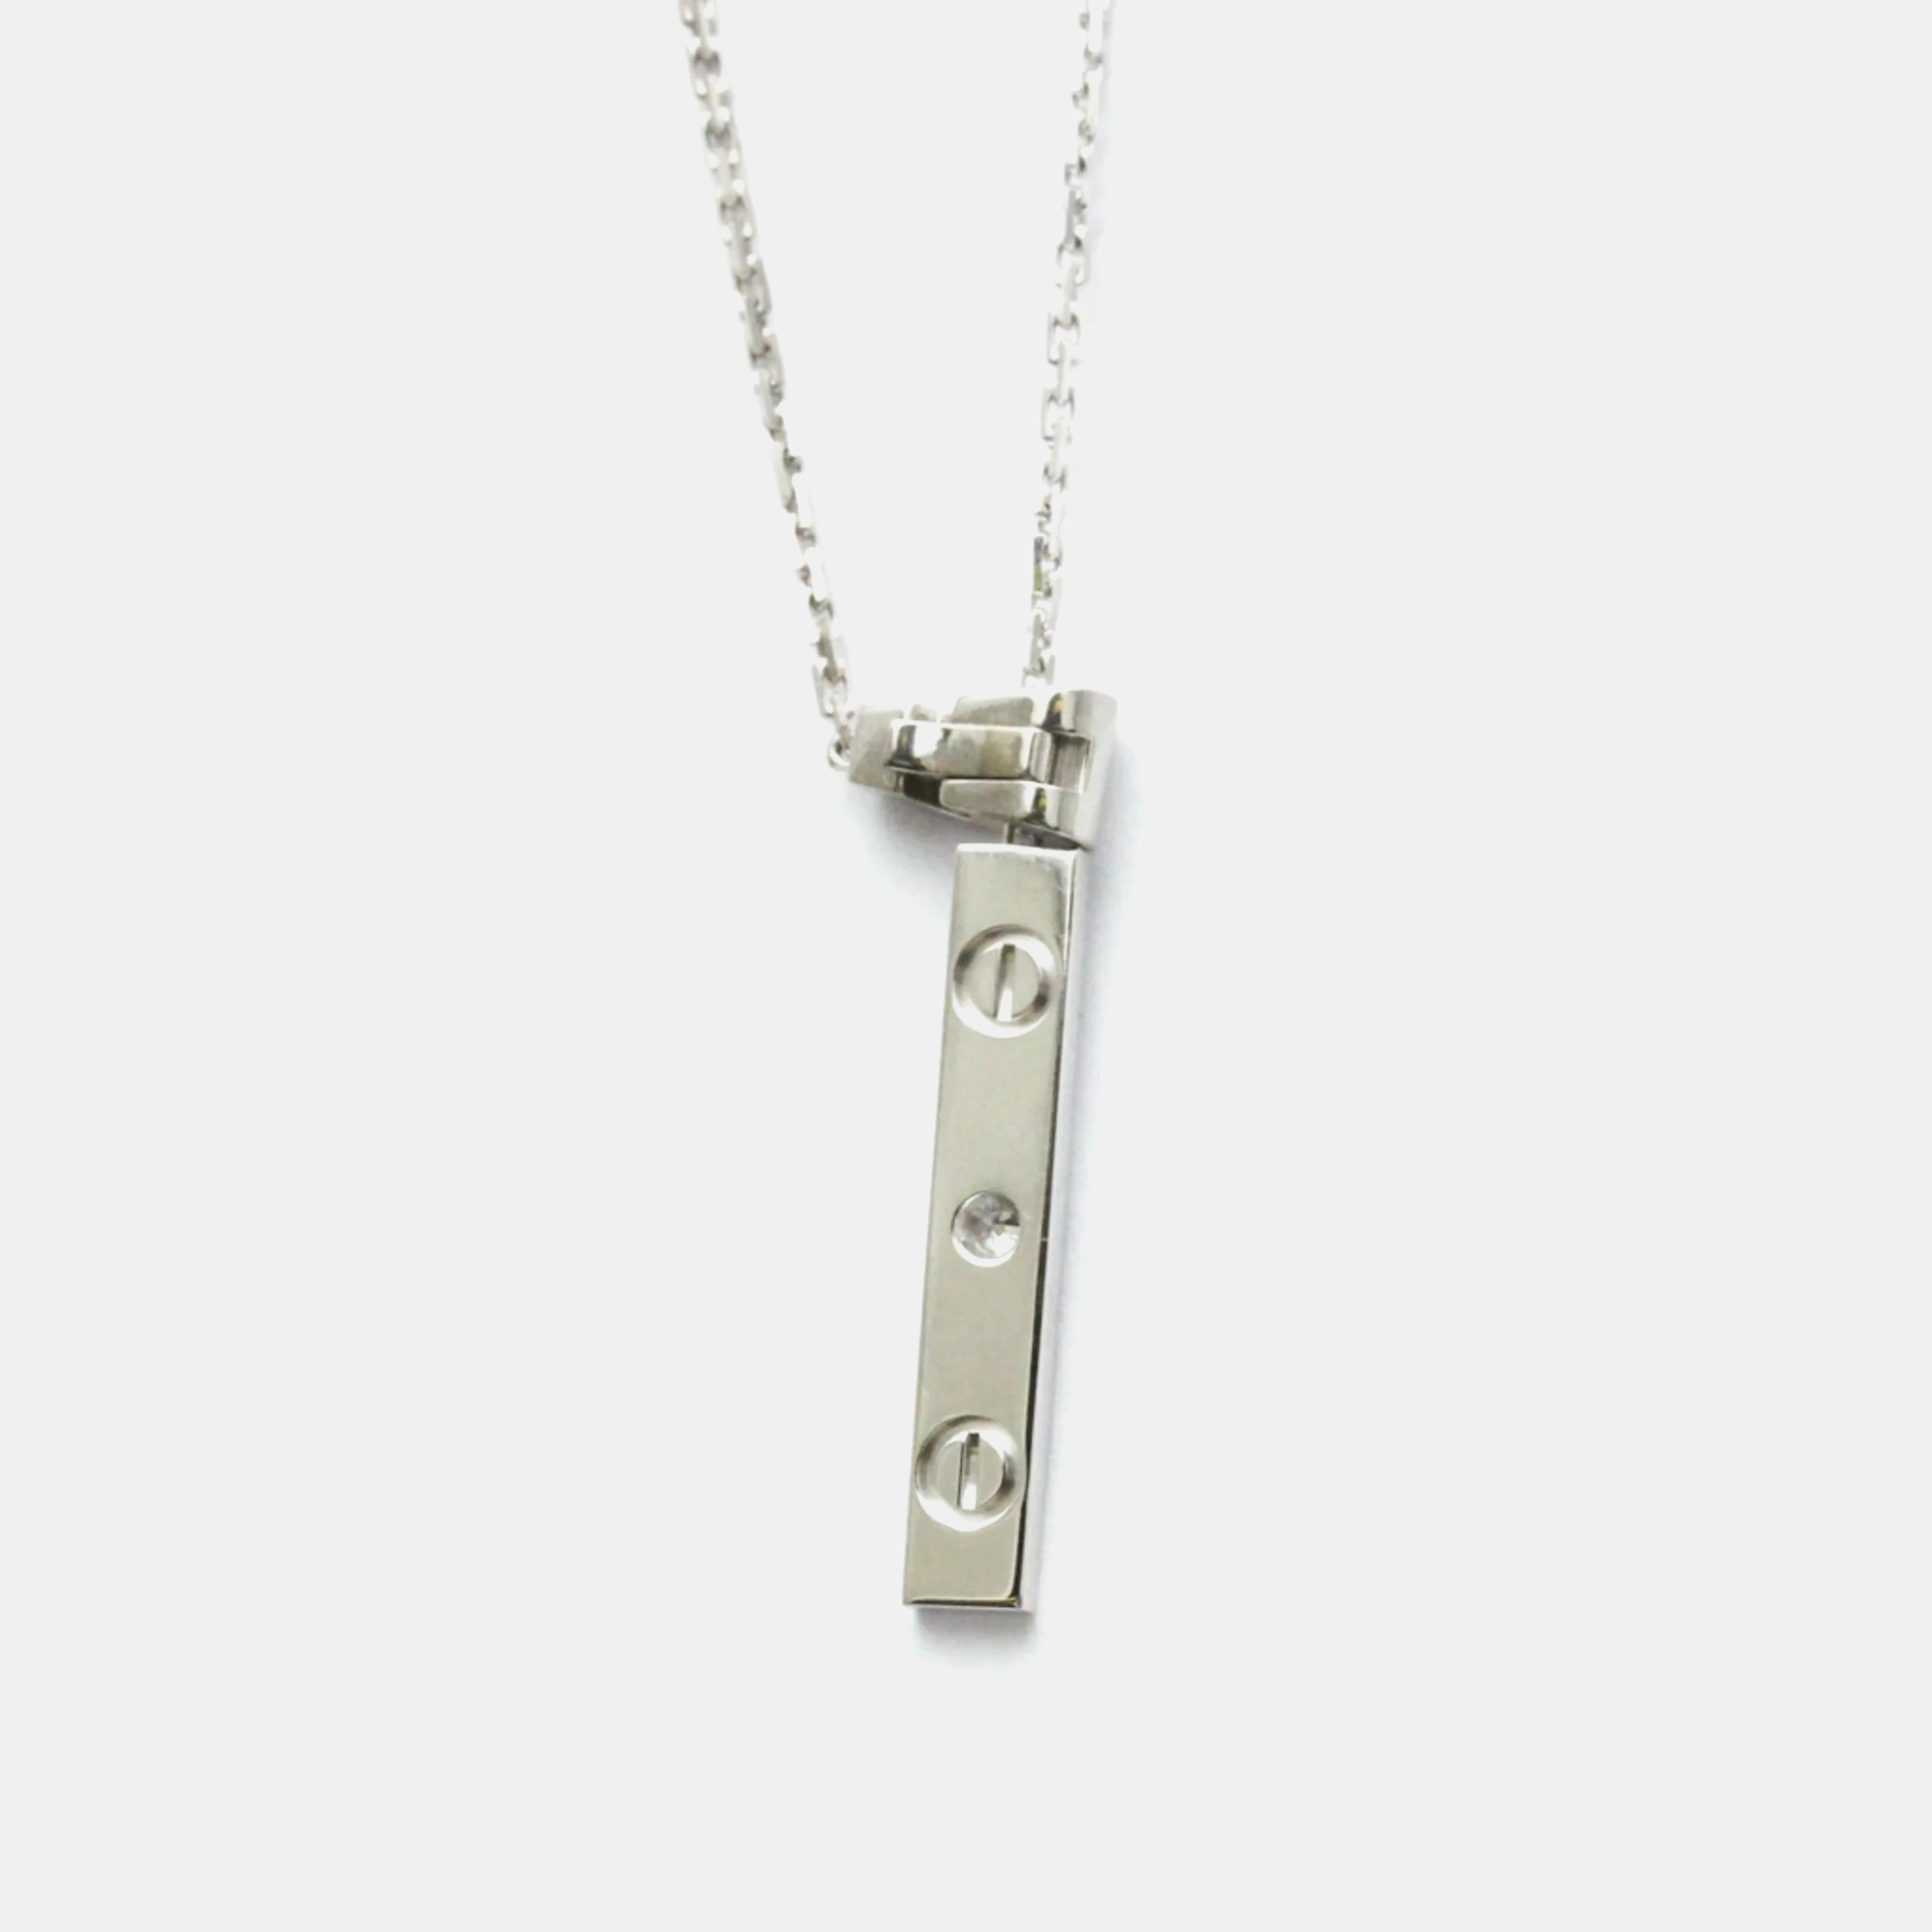 Cartier 18k white gold love lariat necklace